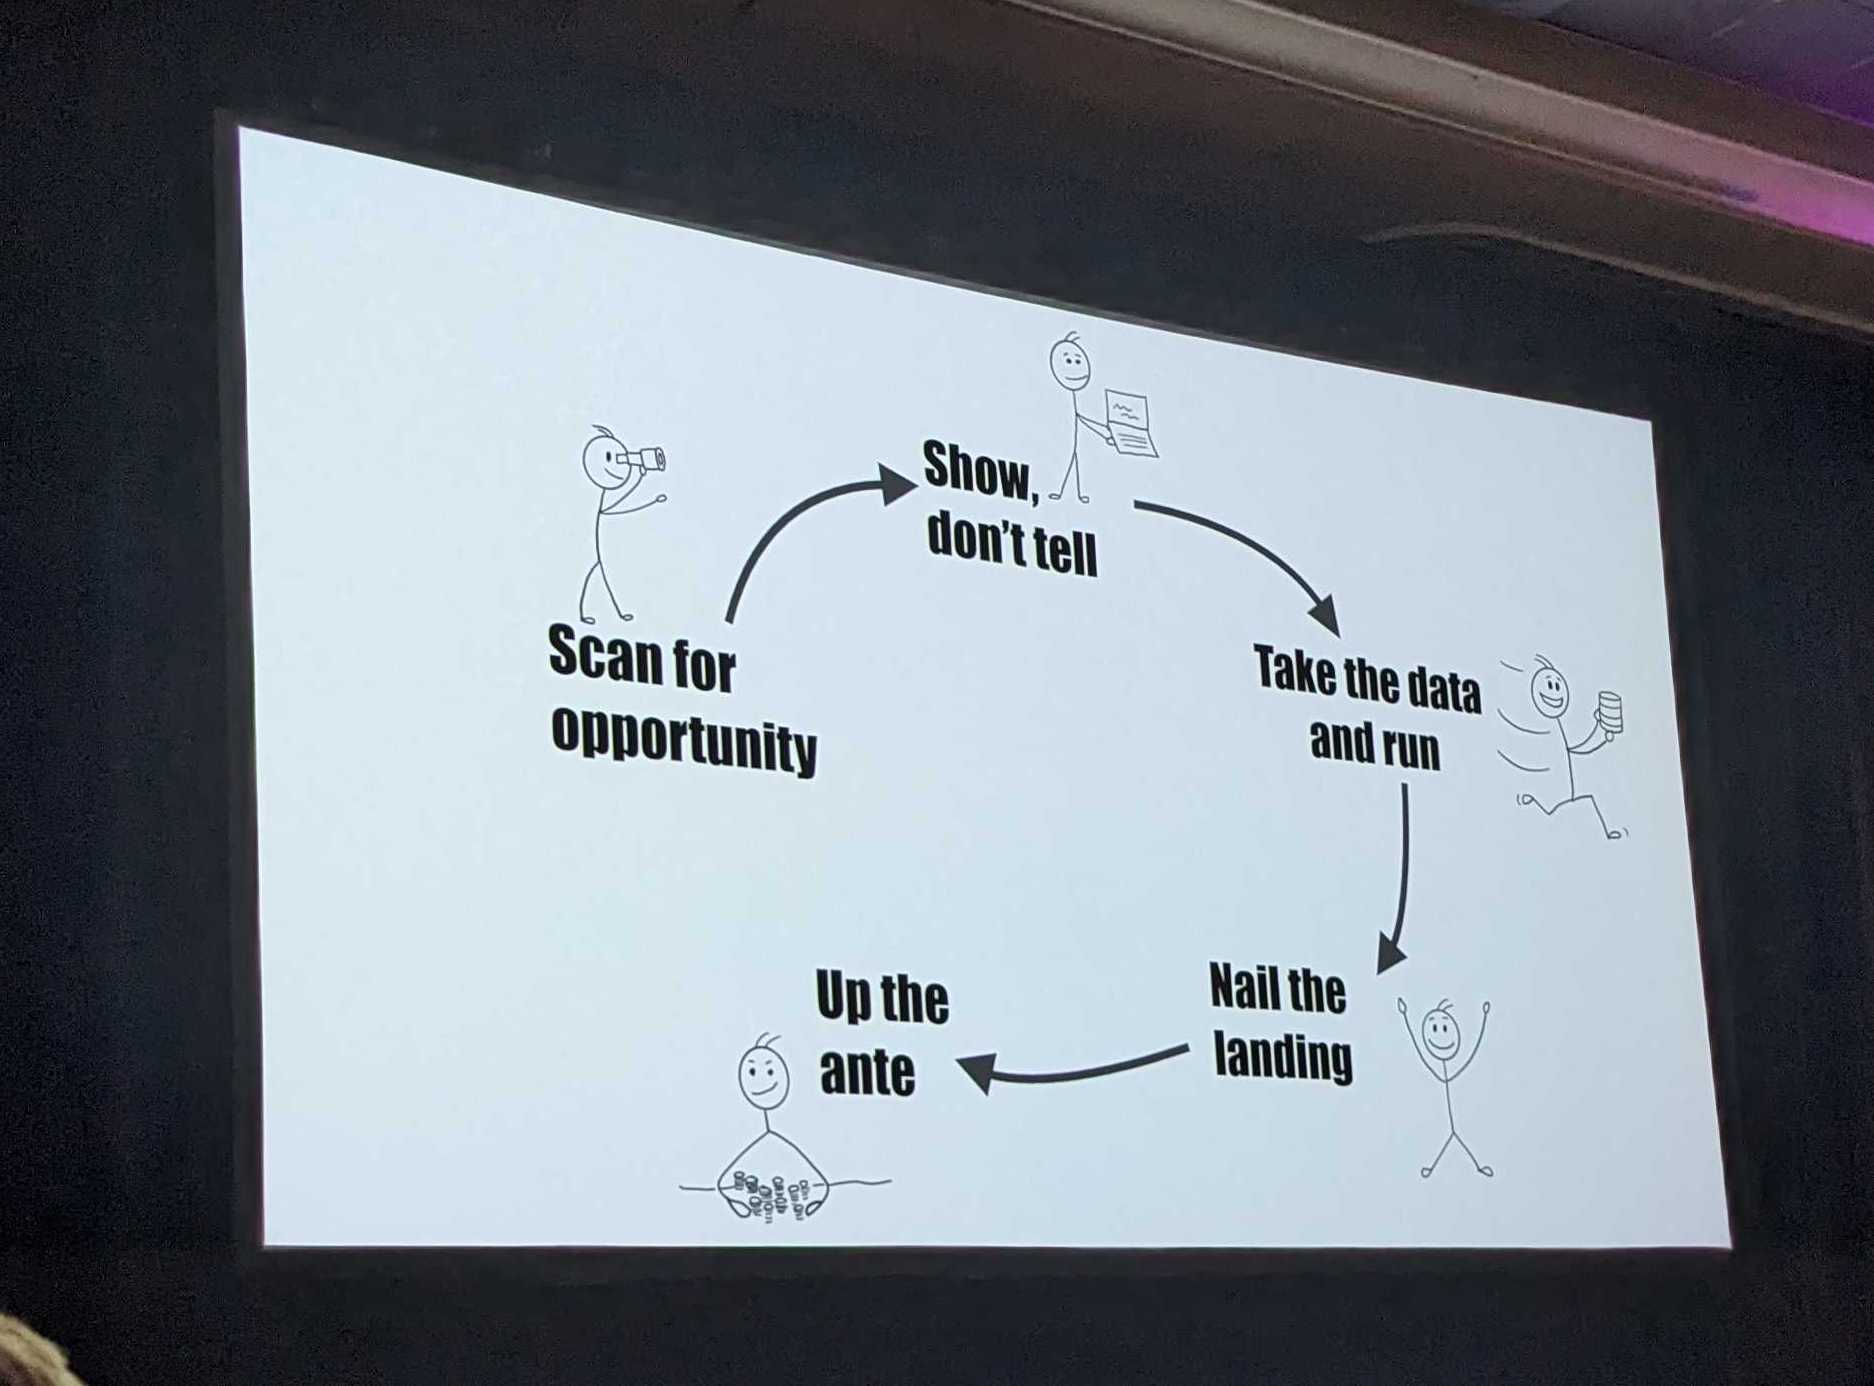 photo of presentation slide with stick figures illustrating a cycle of 5 steps labeled Scan for opportunity, Show don't tell, Take the data and run, Nail the landing, Up the ante.